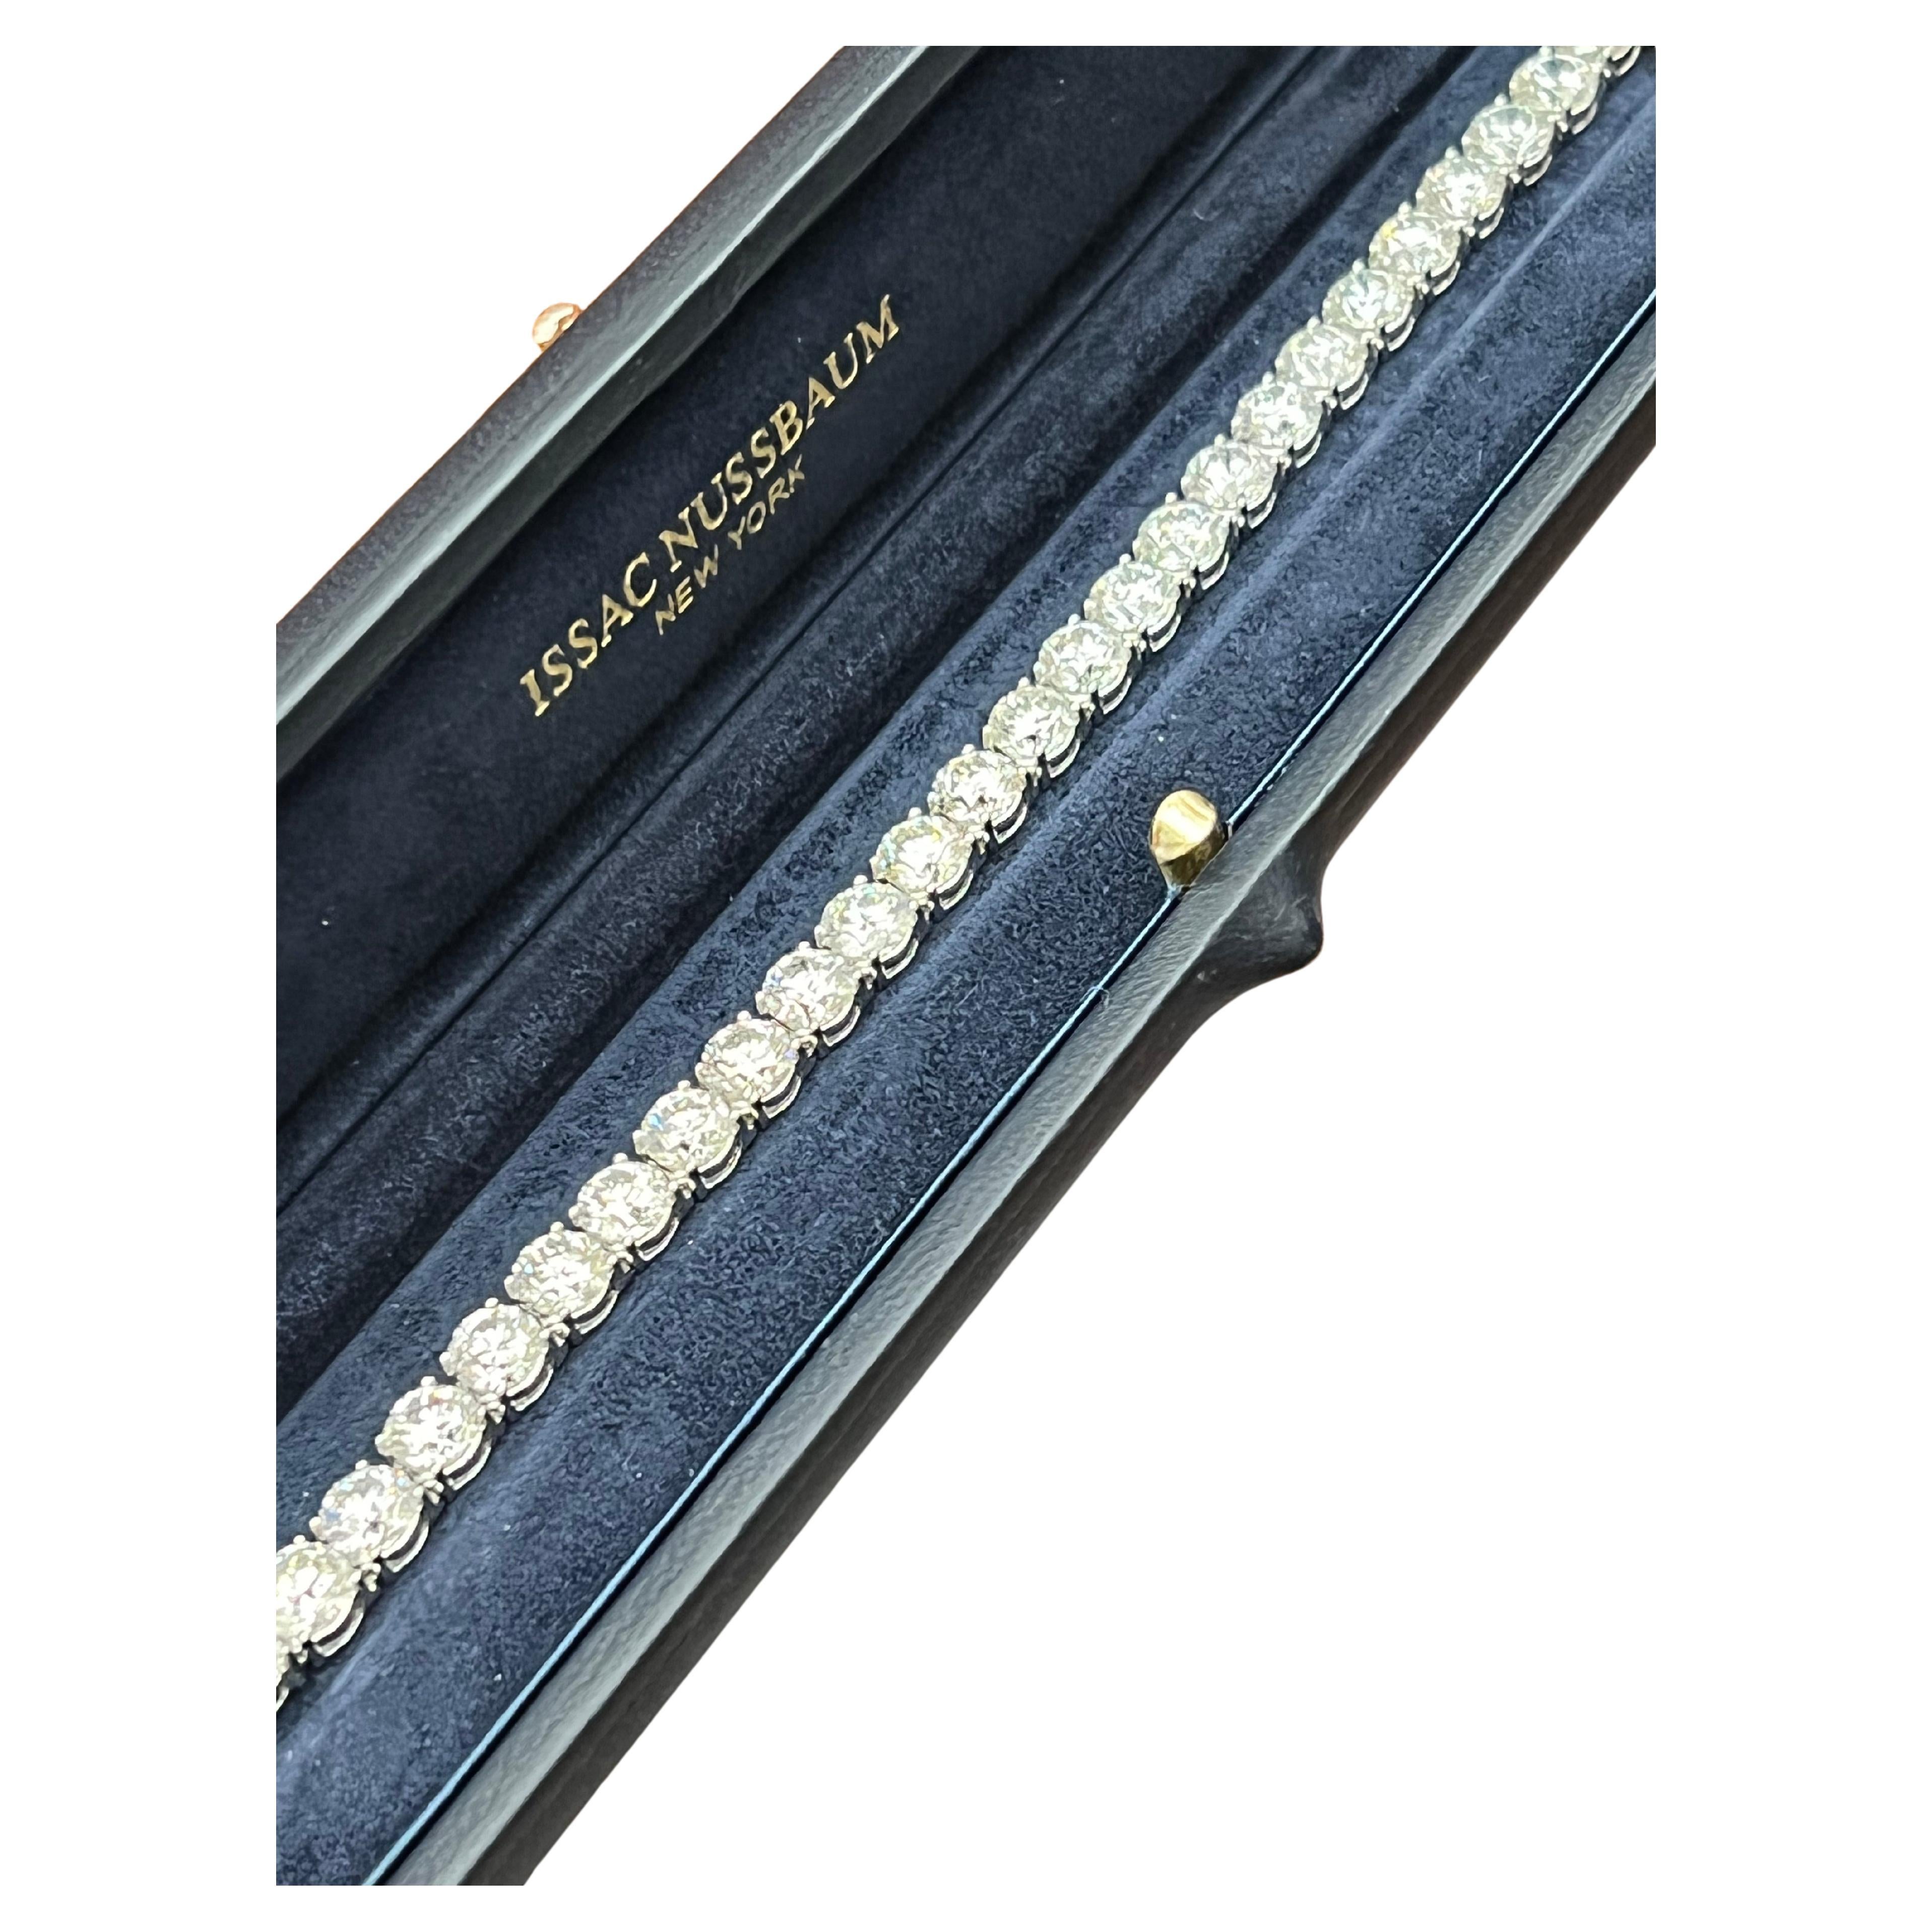 Diamond tennis Bracelet 
An incredible all GIA certified diamond bracelet set with 27 individual ideal cut round brilliant diamonds with an astonishing total carat weight of approximately TWENTY FIVE CARATS (25 ). 
These individual diamonds were